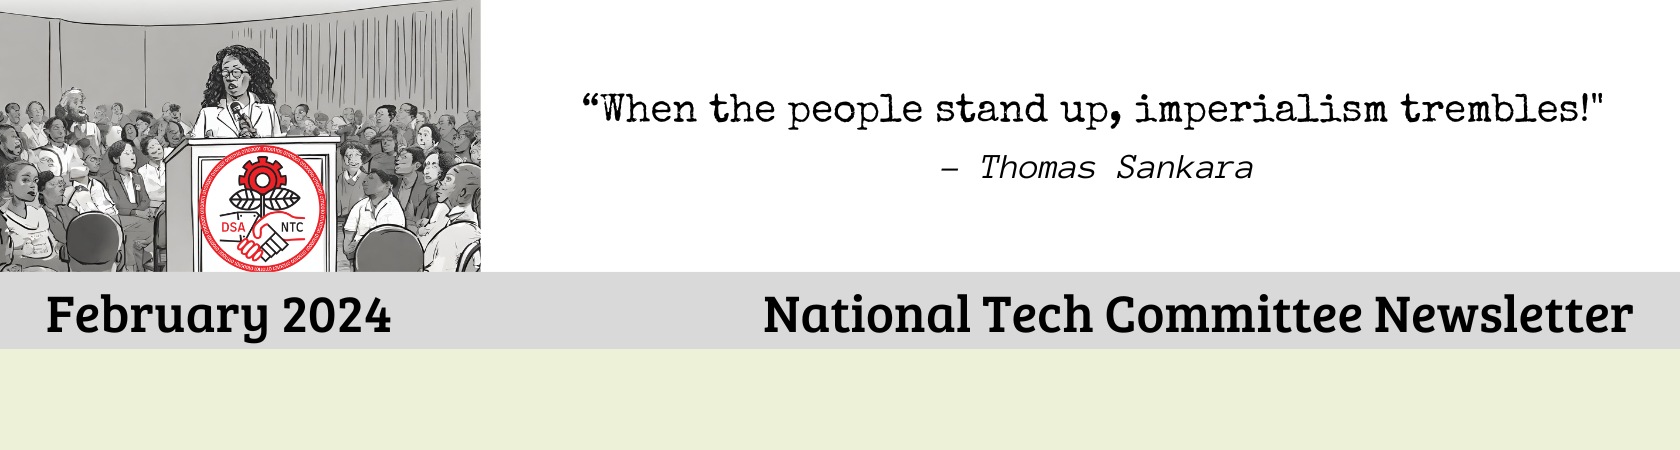 When the people stand up, imperialism trembles!
        - Thomas Sankara
        February 2023. National Tech Committee Newsletter